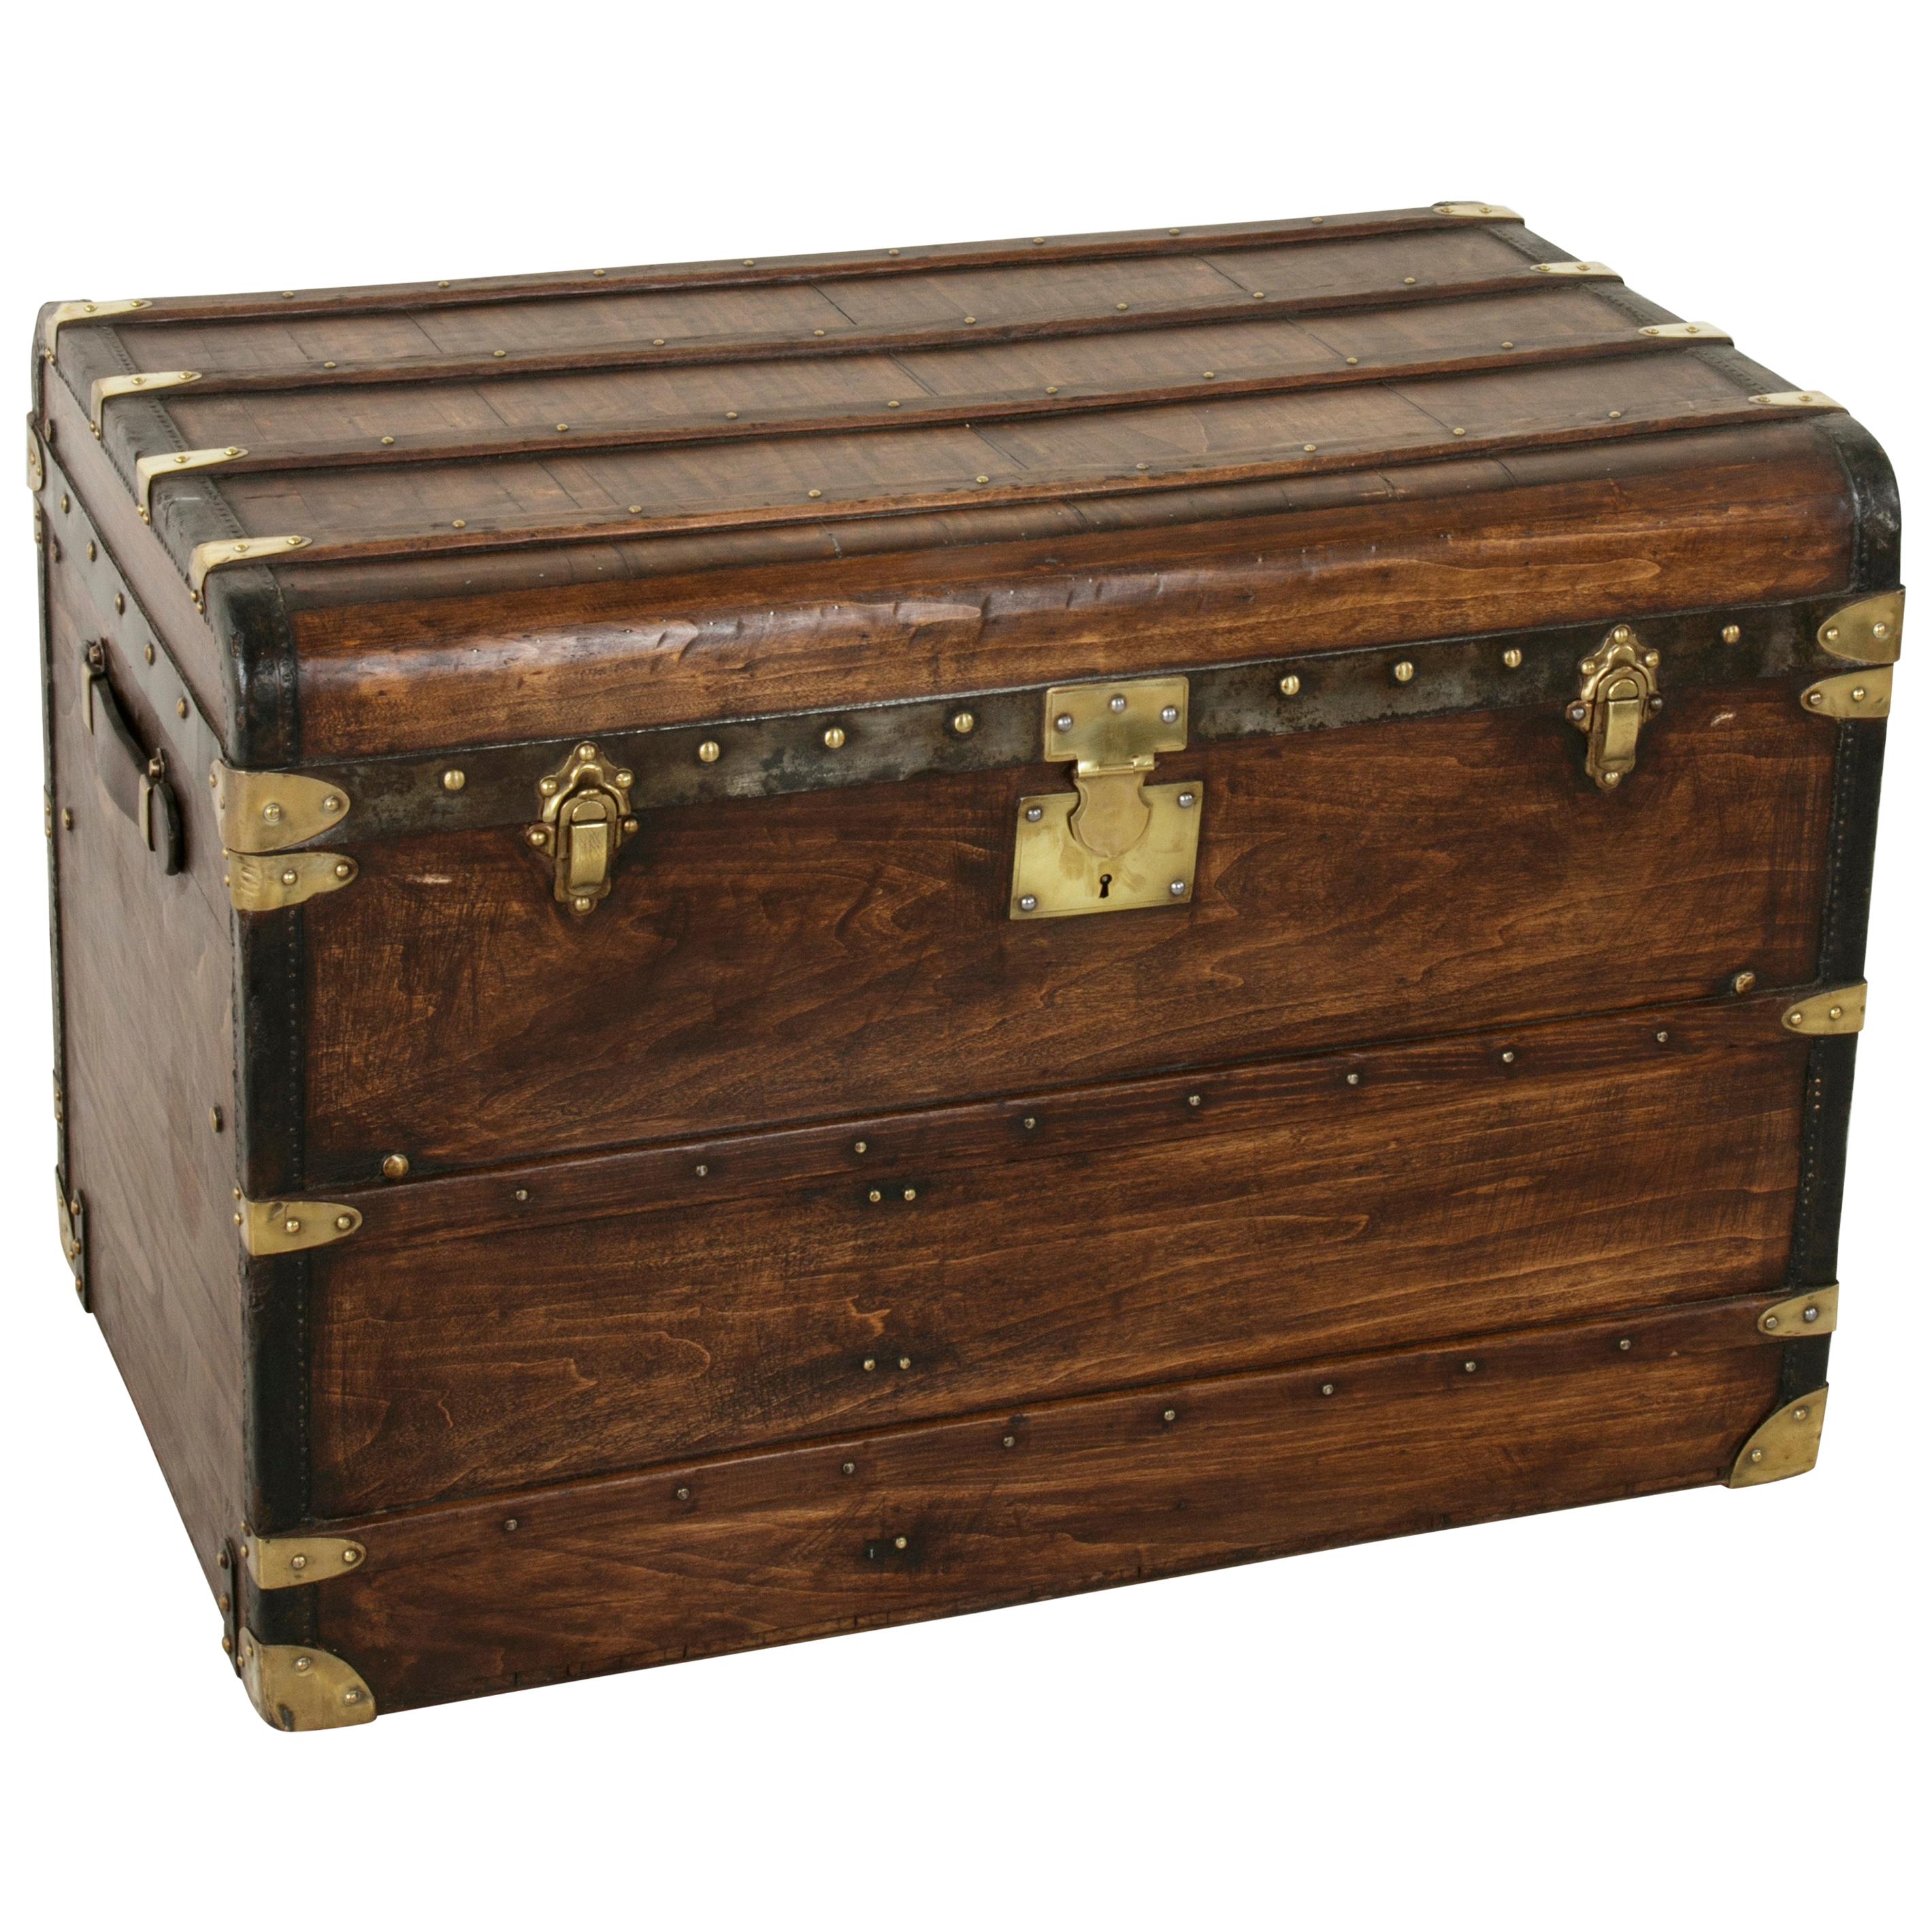 French Wooden Steam Trunk with Runners, Brass, Iron, Leather Details, circa 1900